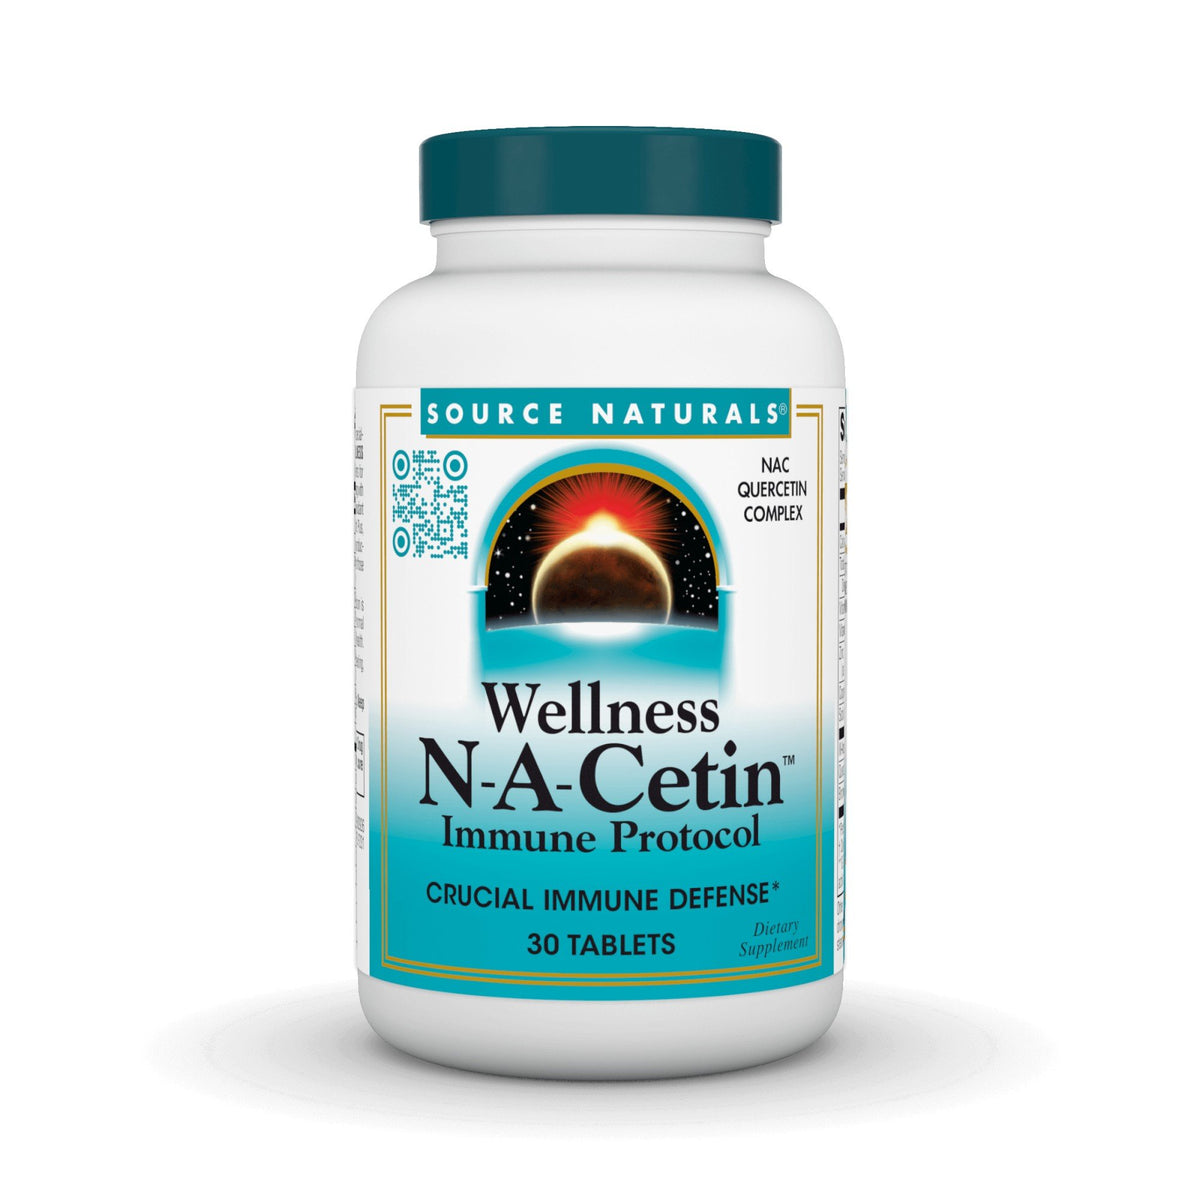 Source Naturals, Inc. Wellness N-A-Cetin Immune Protocol 30 Tablet